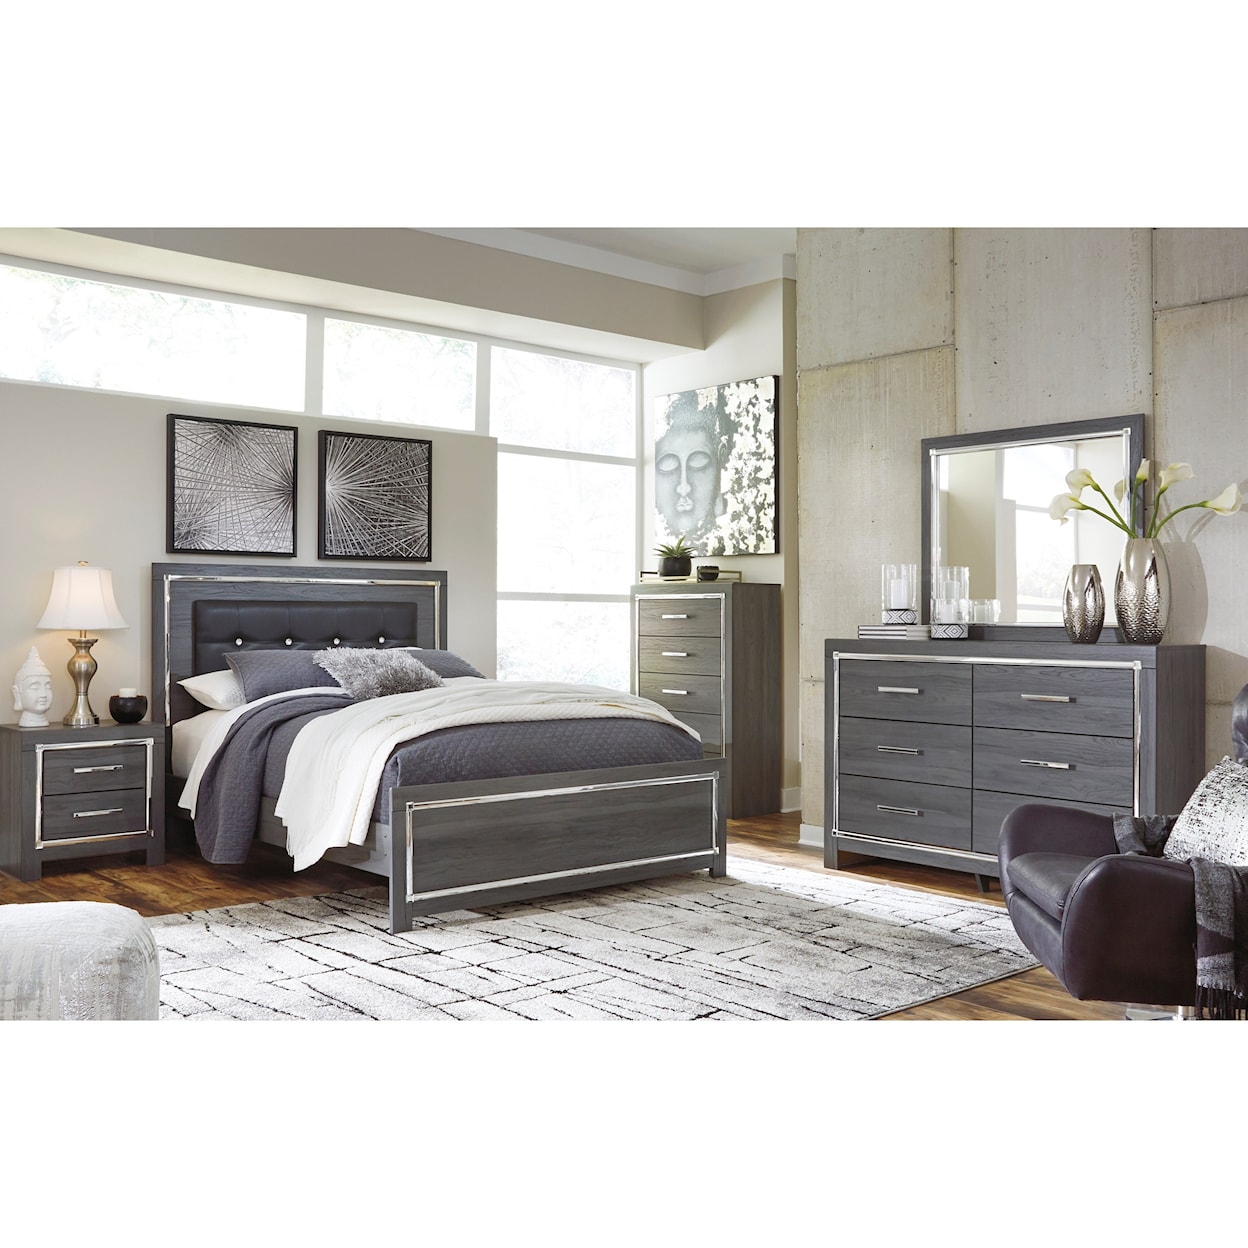 Signature Design by Ashley Lodanna King 5-PC Bedroom Group